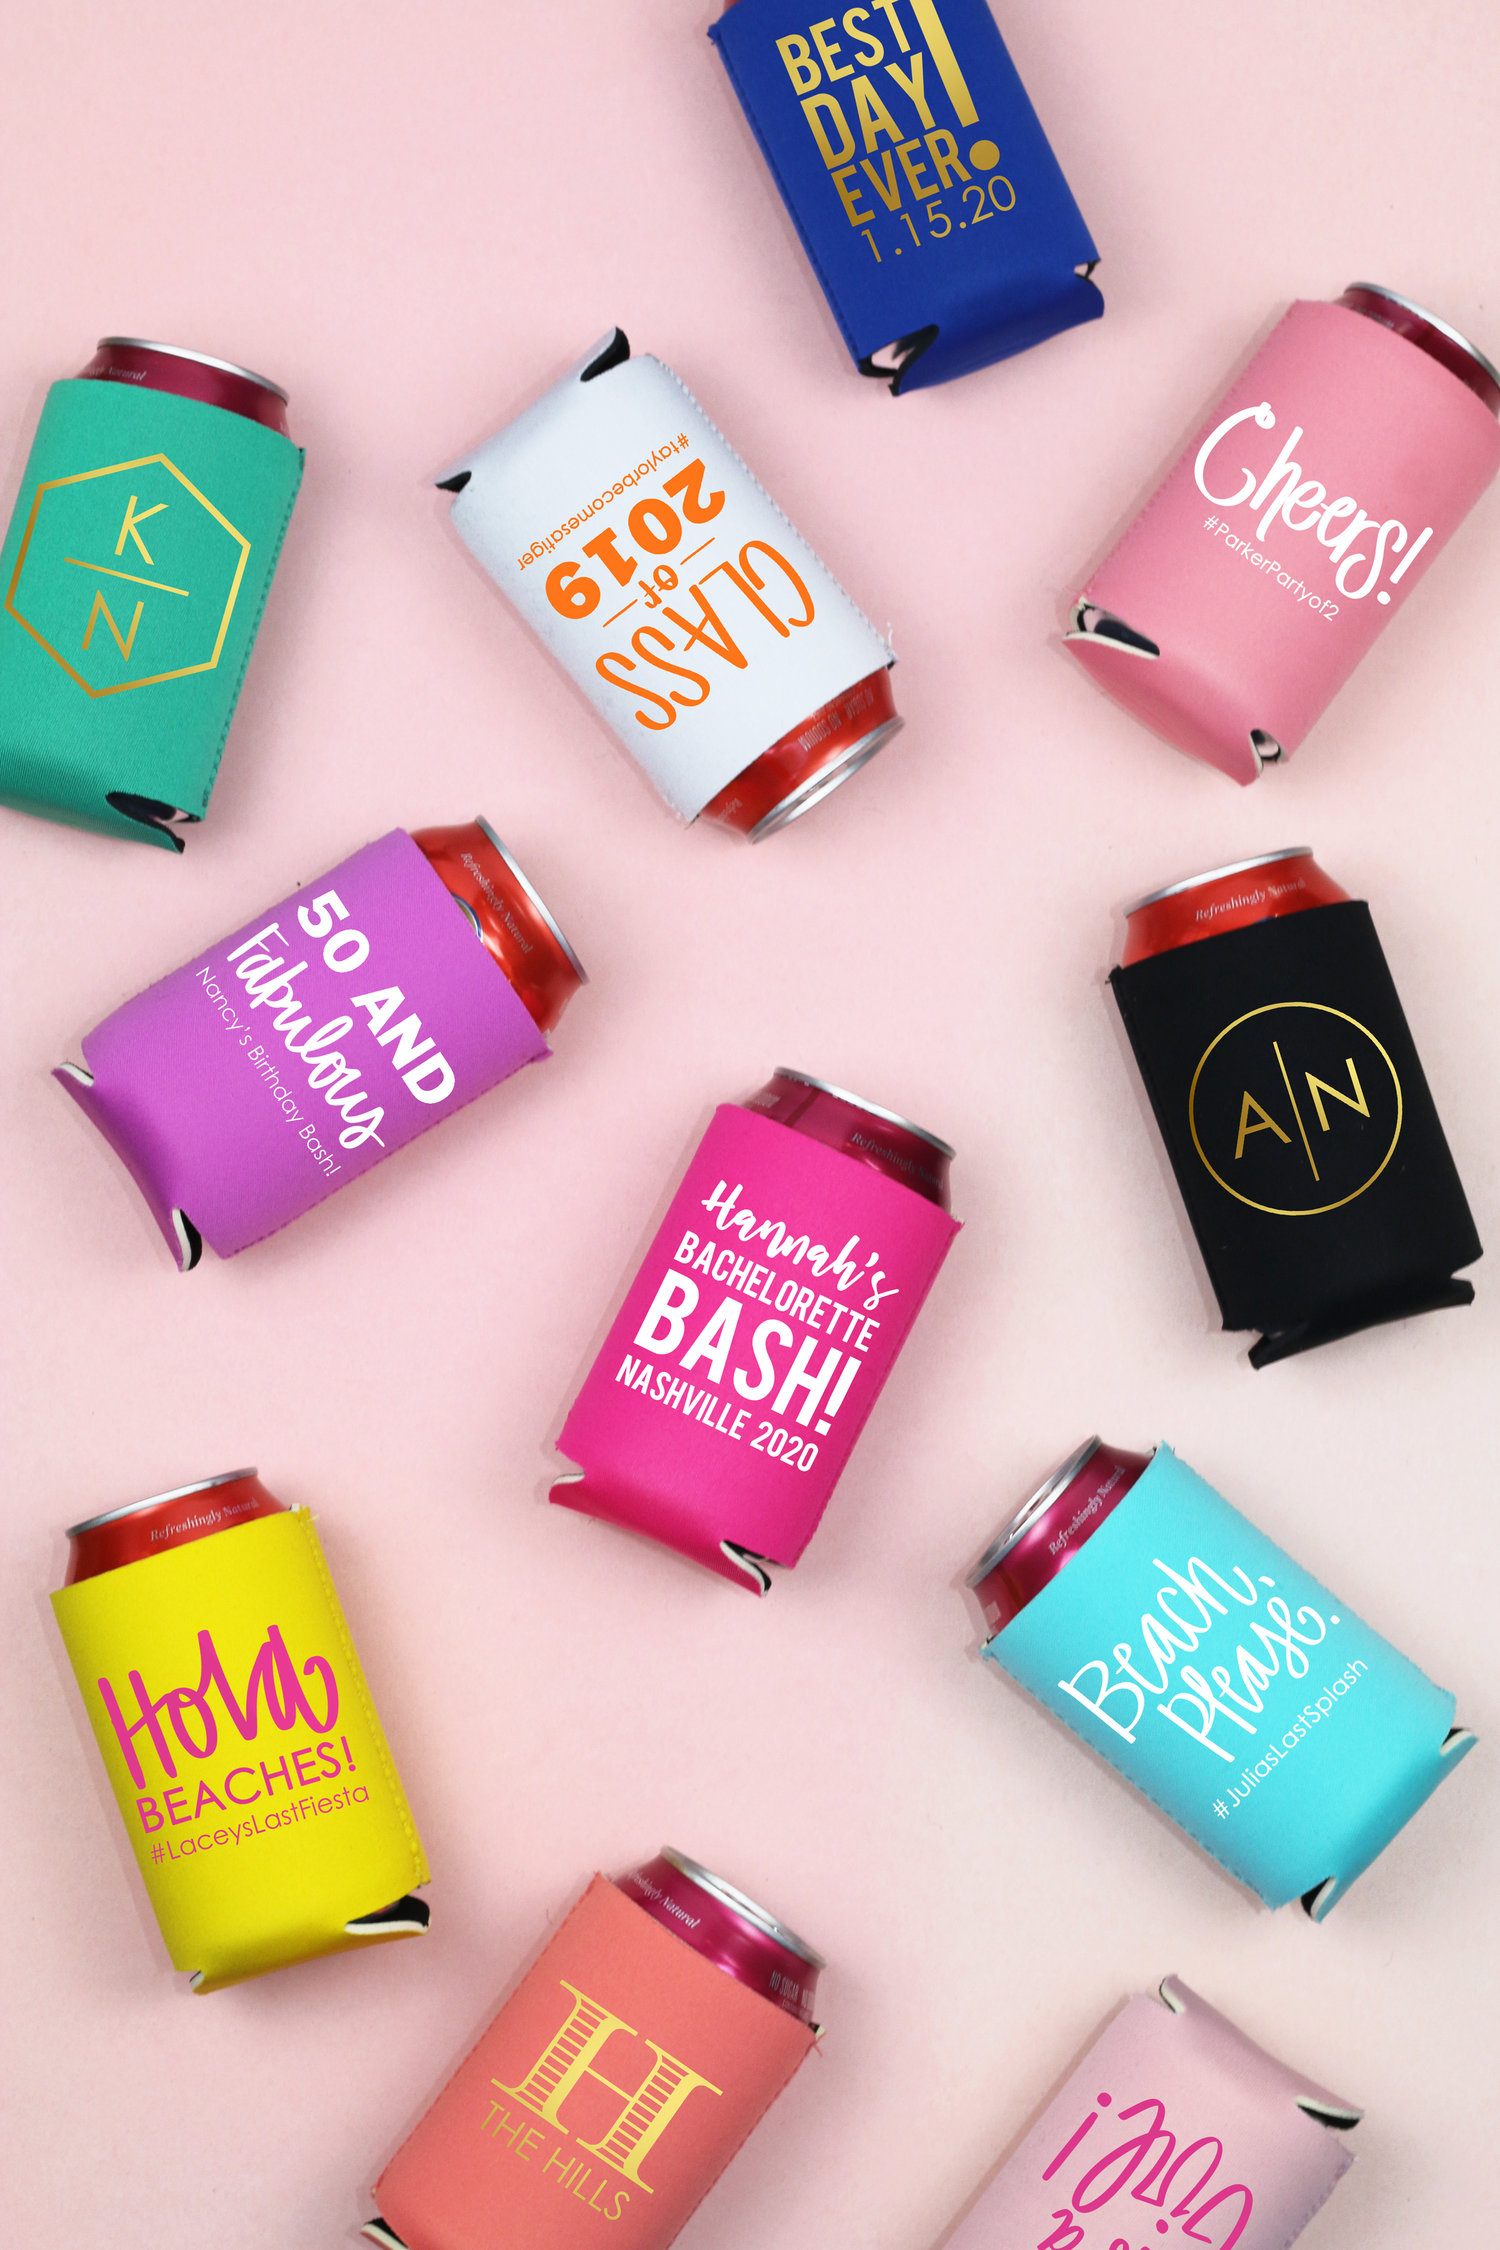 Wedding Can Coolers, Slim | Let's Drink